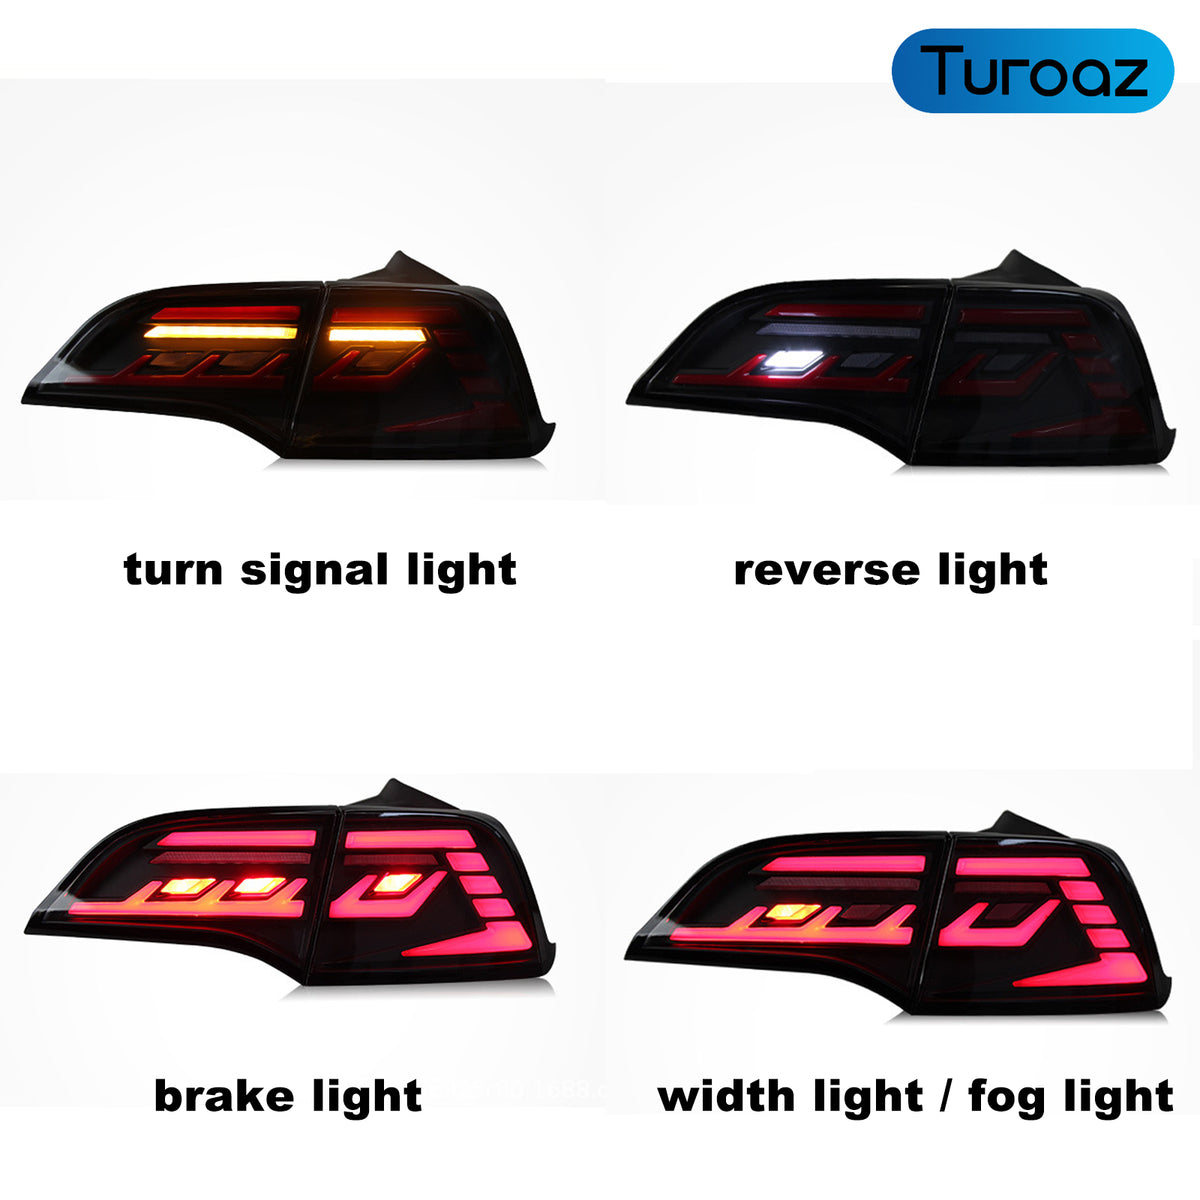 Turoaz LED Tail Light Assembly for Tesla Model 3 Y 2021+ , Streamlined LED Sequential Turn Lights with Dynamic Startup Back Rear Lamps, Reverse Lights Accessories (magic star)